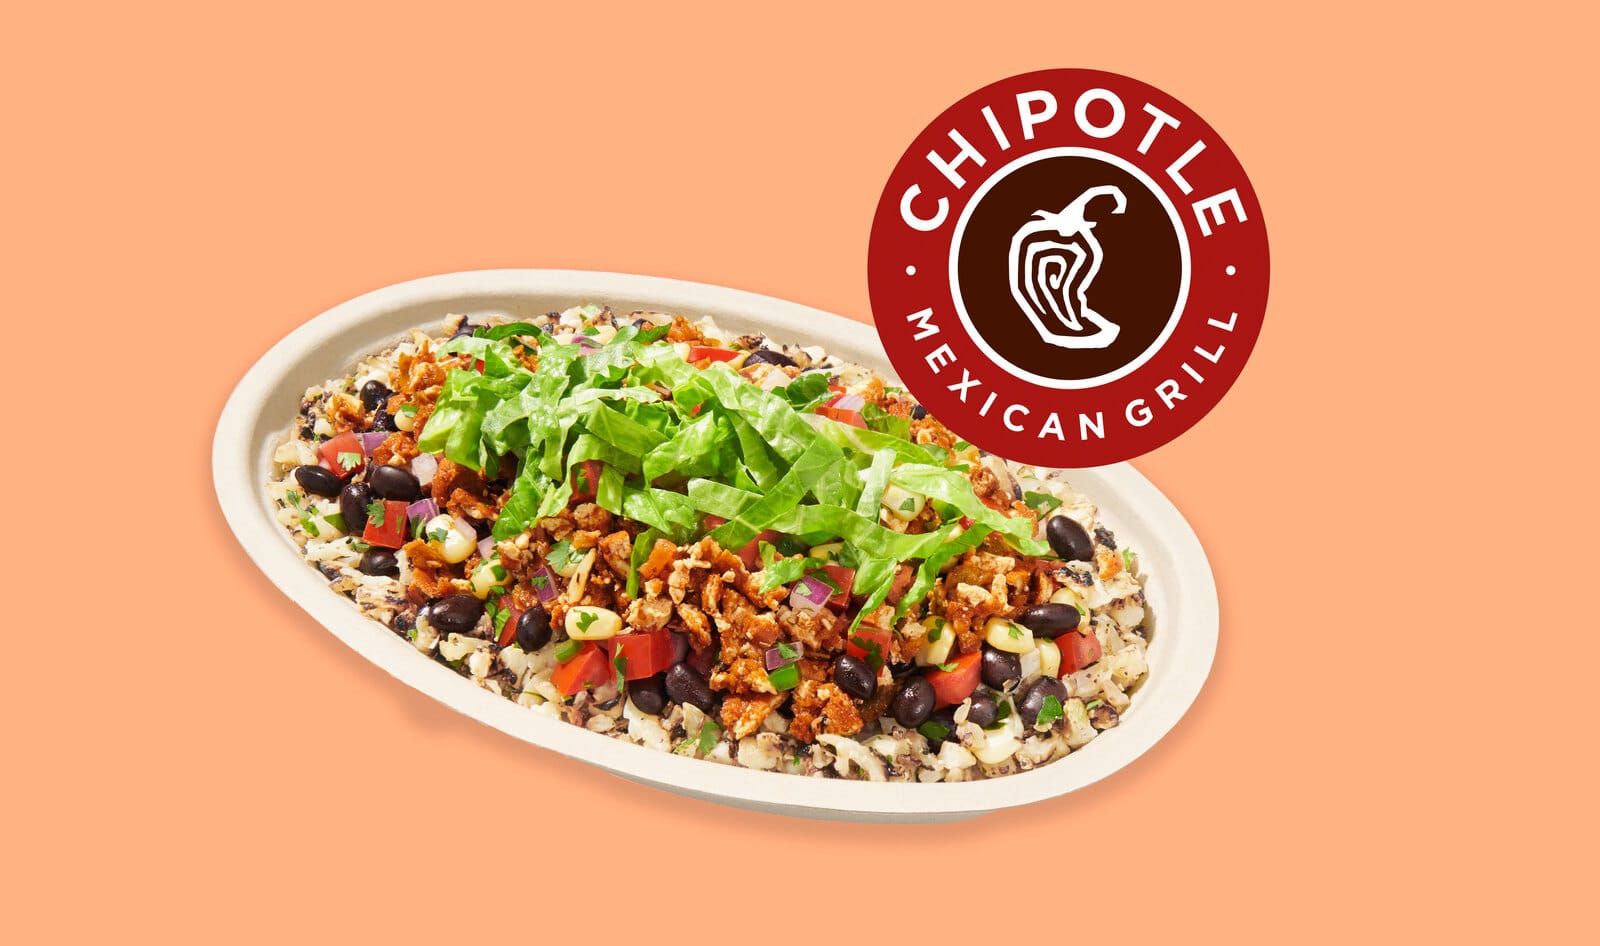 Love Cauliflower Rice? Chipotle’s New Vegan Keto Option Is for You